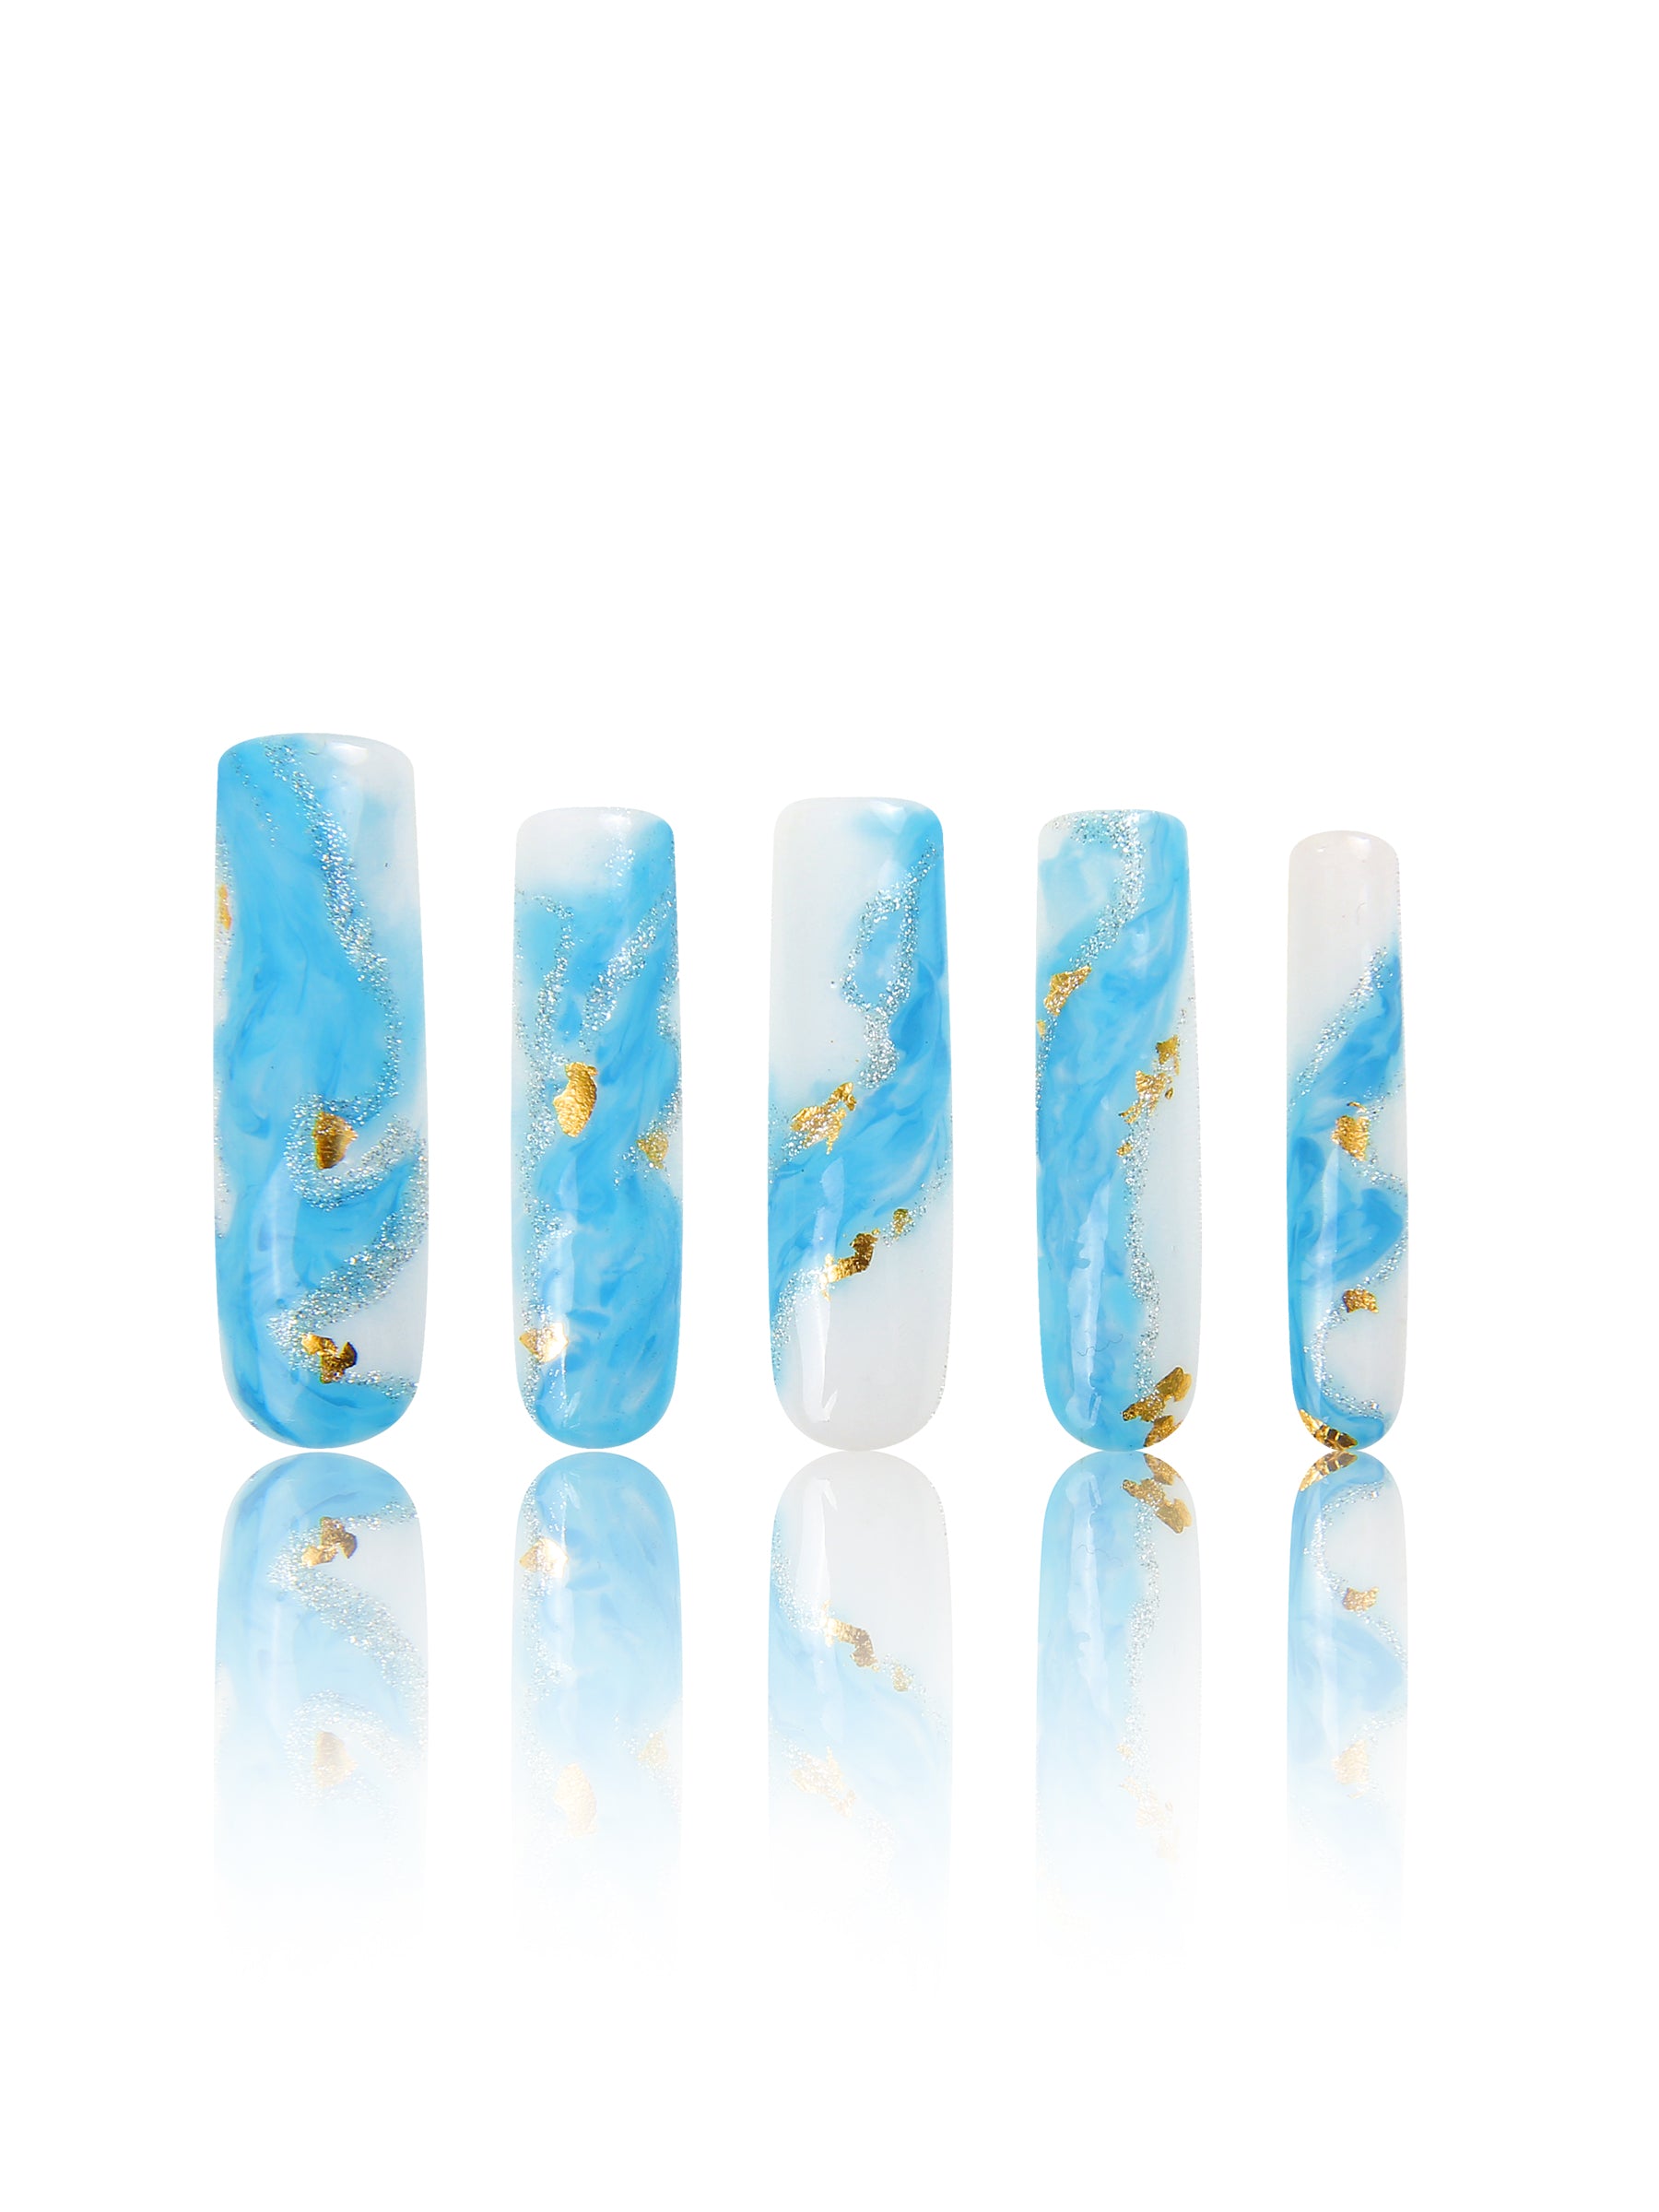 Blue Bay Wave blue french tip Square nails H63